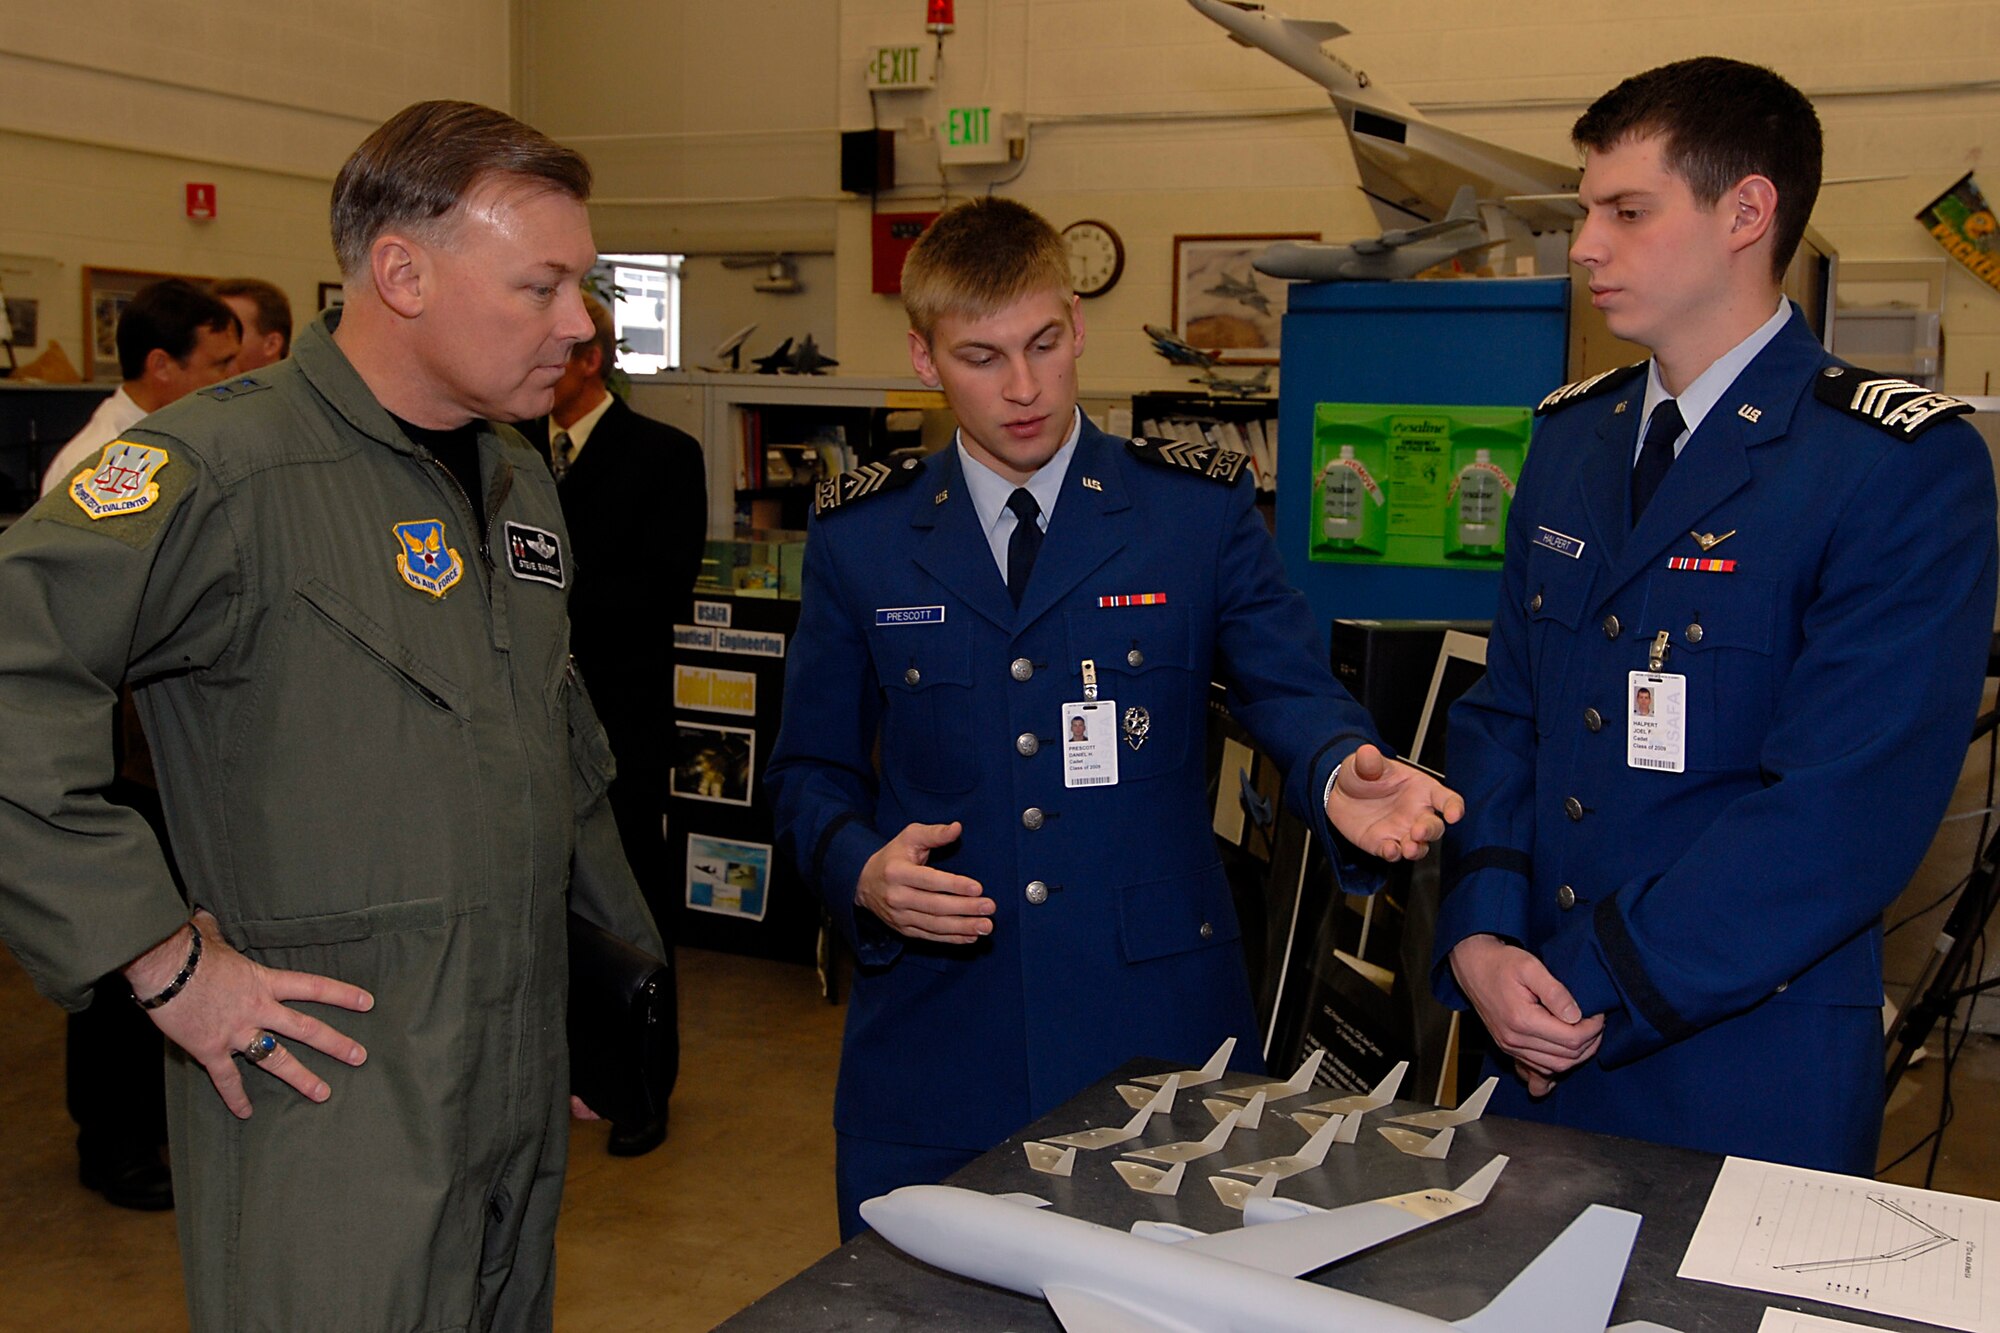 (From left) Maj. Gen. Stephen T. Sargeant, Air Force Operational Test and Evaluation Center Commander, listens as U.S. Air Force Academy cadets explain what they are working on during his tour of Academy astronatutics classes and laboratories on March 17, 2008.